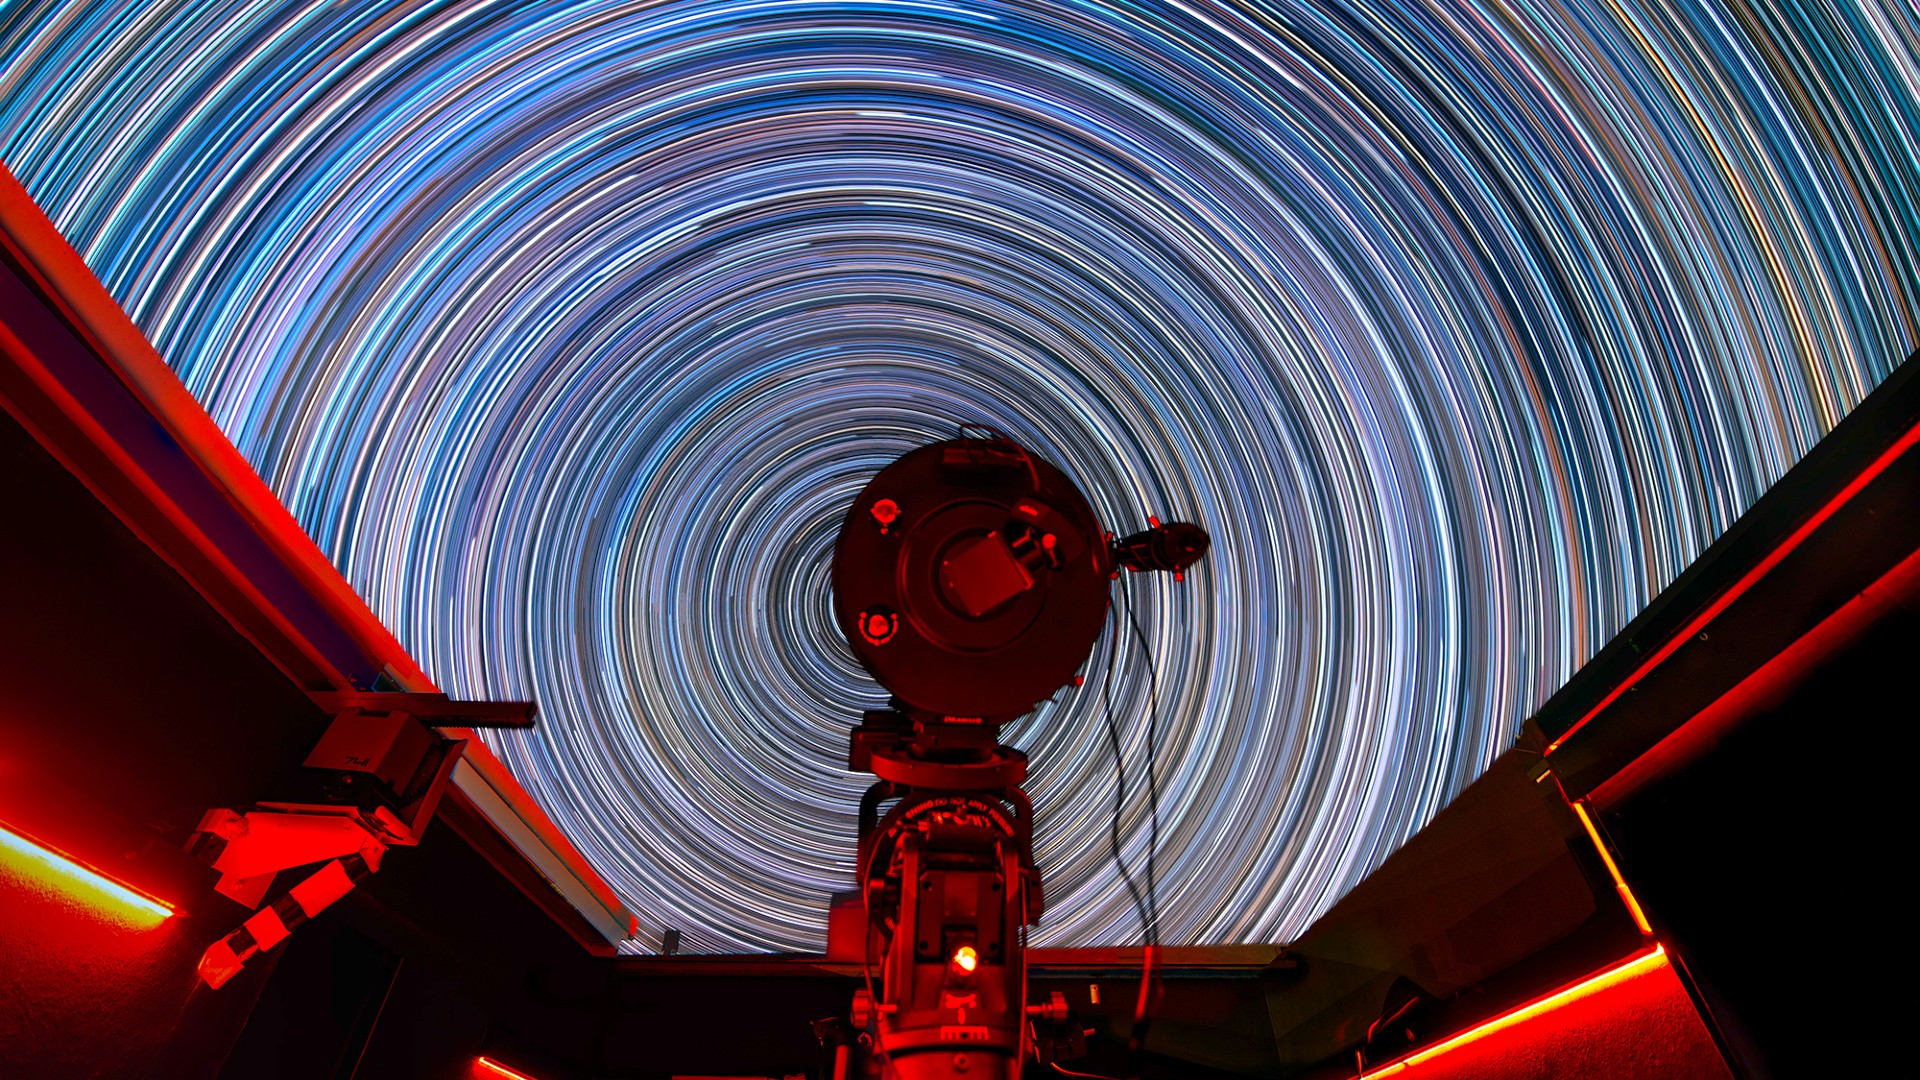 Stunning night sky time-lapse shows how colorful the stars really are (photo)